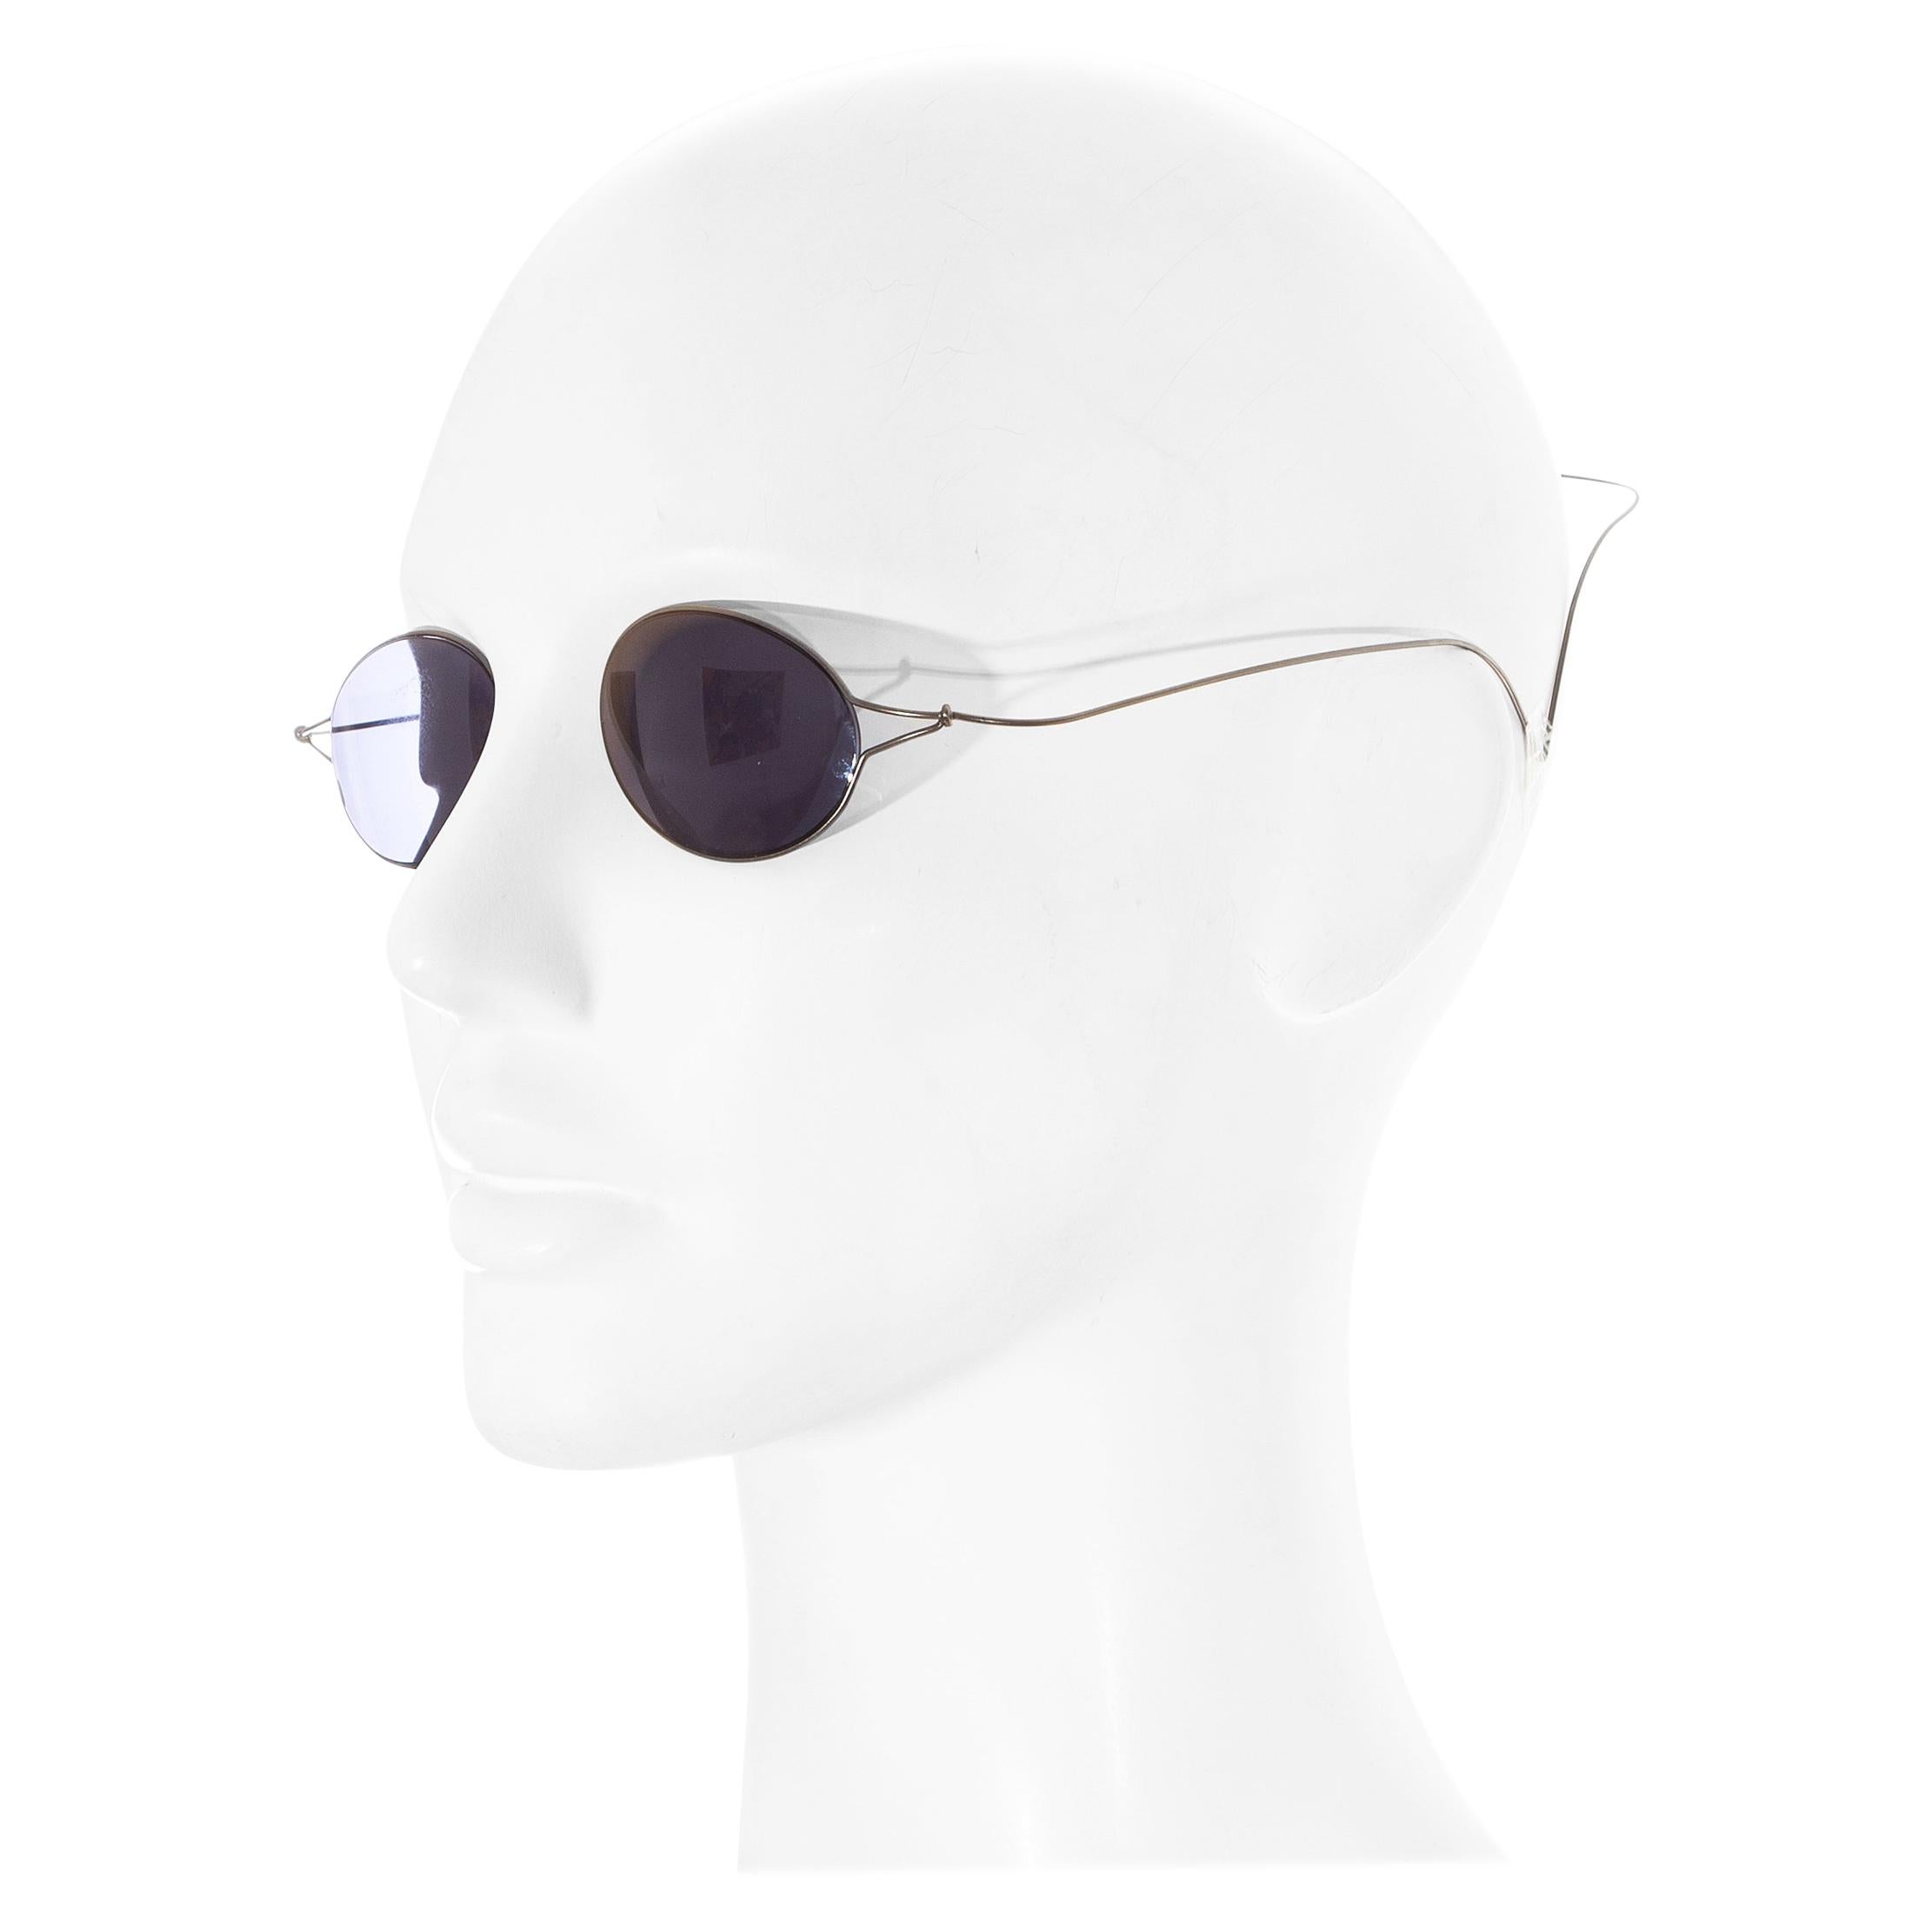 Chanel by Karl Lagerfeld 'Double Monocle' sunglasses for sunbathing, ss 1999 For Sale